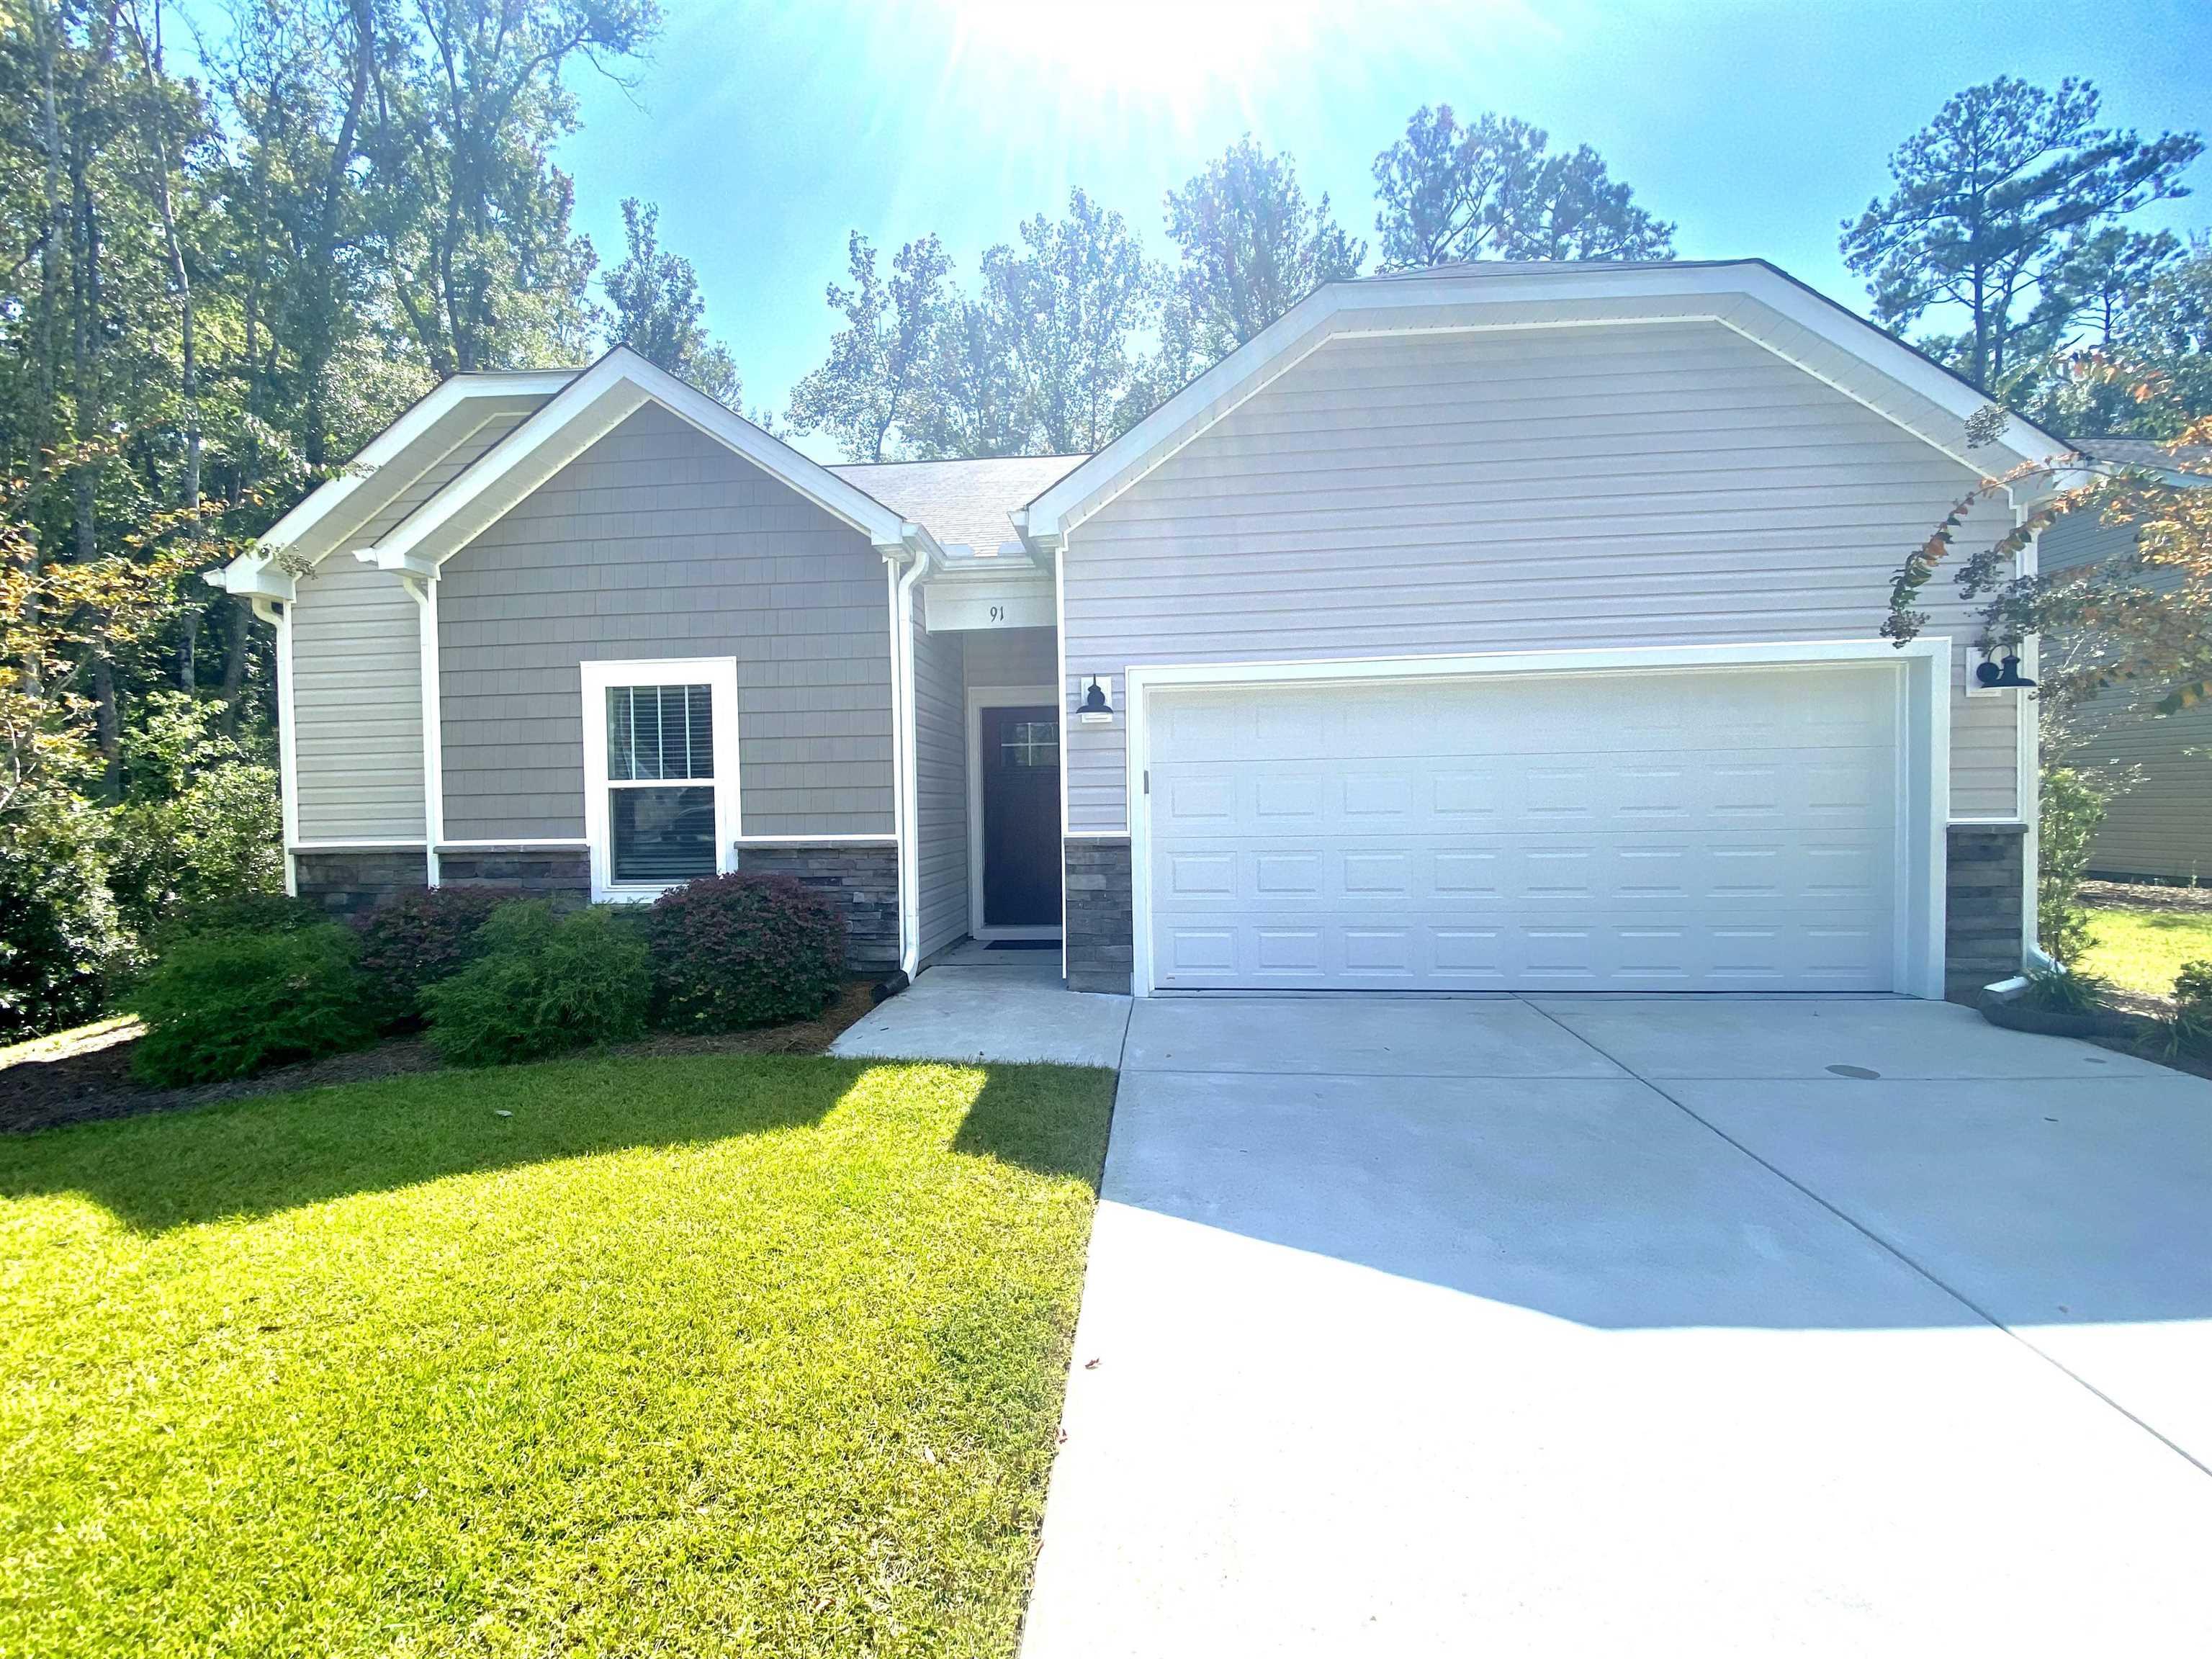 91 Clearwater Dr., Pawleys Island, SC 29585